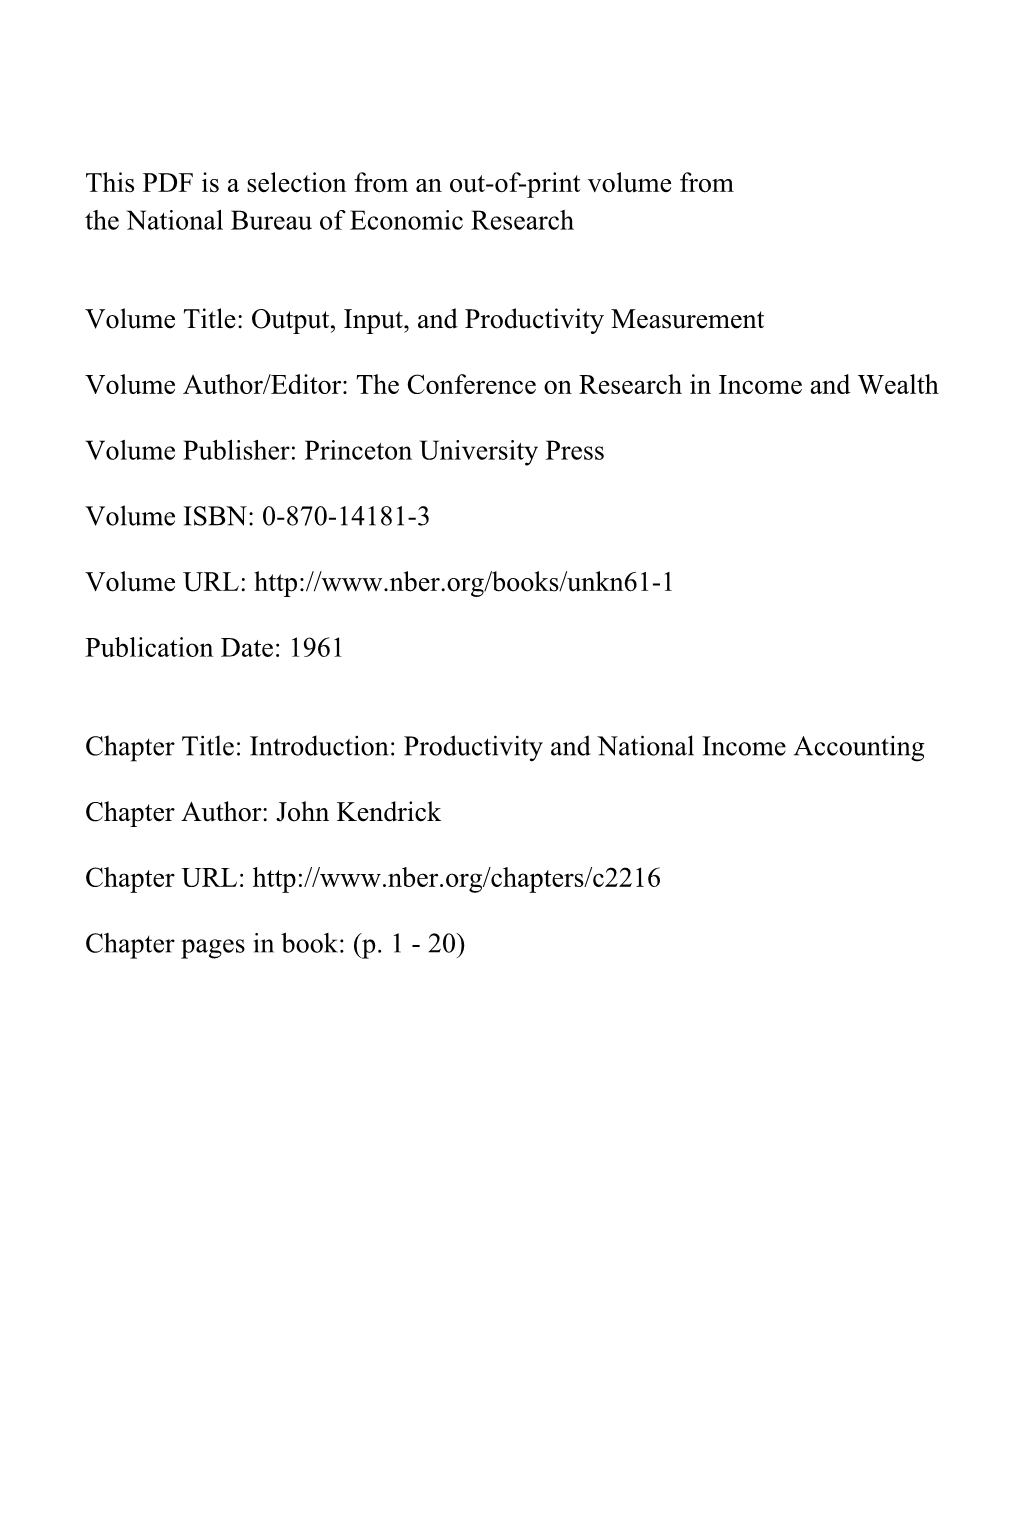 Productivity and National Income Accounting